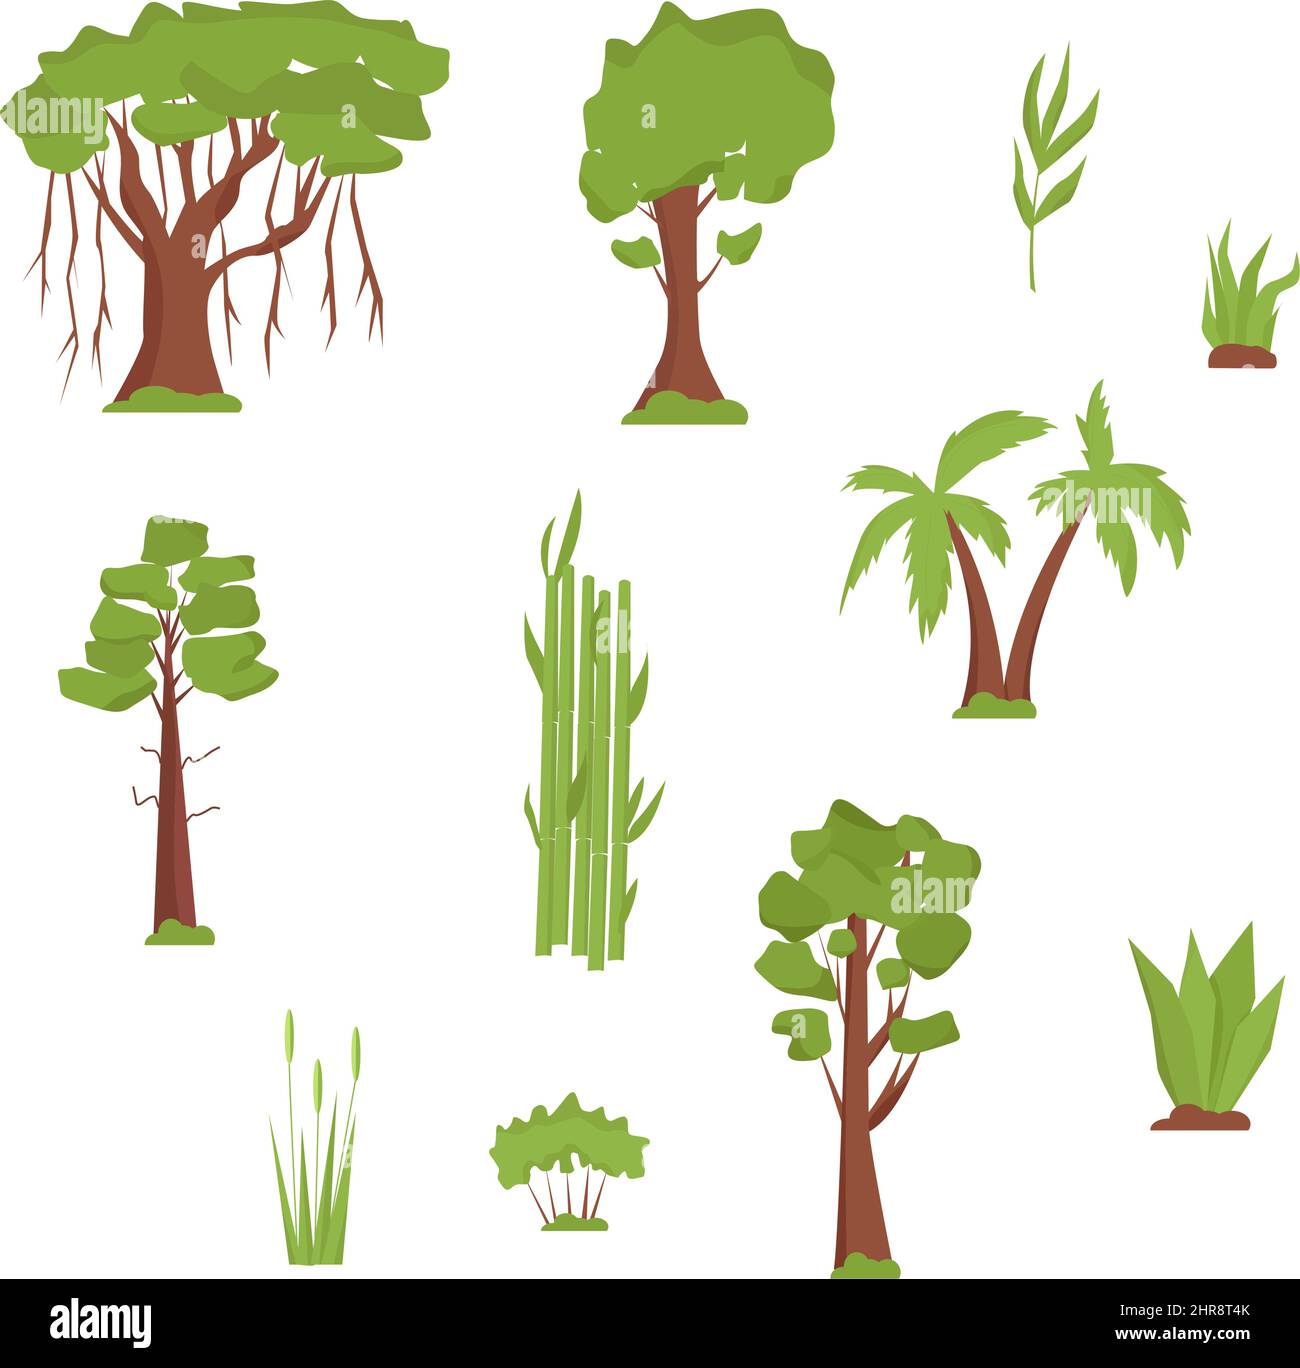 Vegetation of India. Trees and grass. Banyan, palm trees, bamboo, sandalwood, coniferous trees in flat design Stock Vector